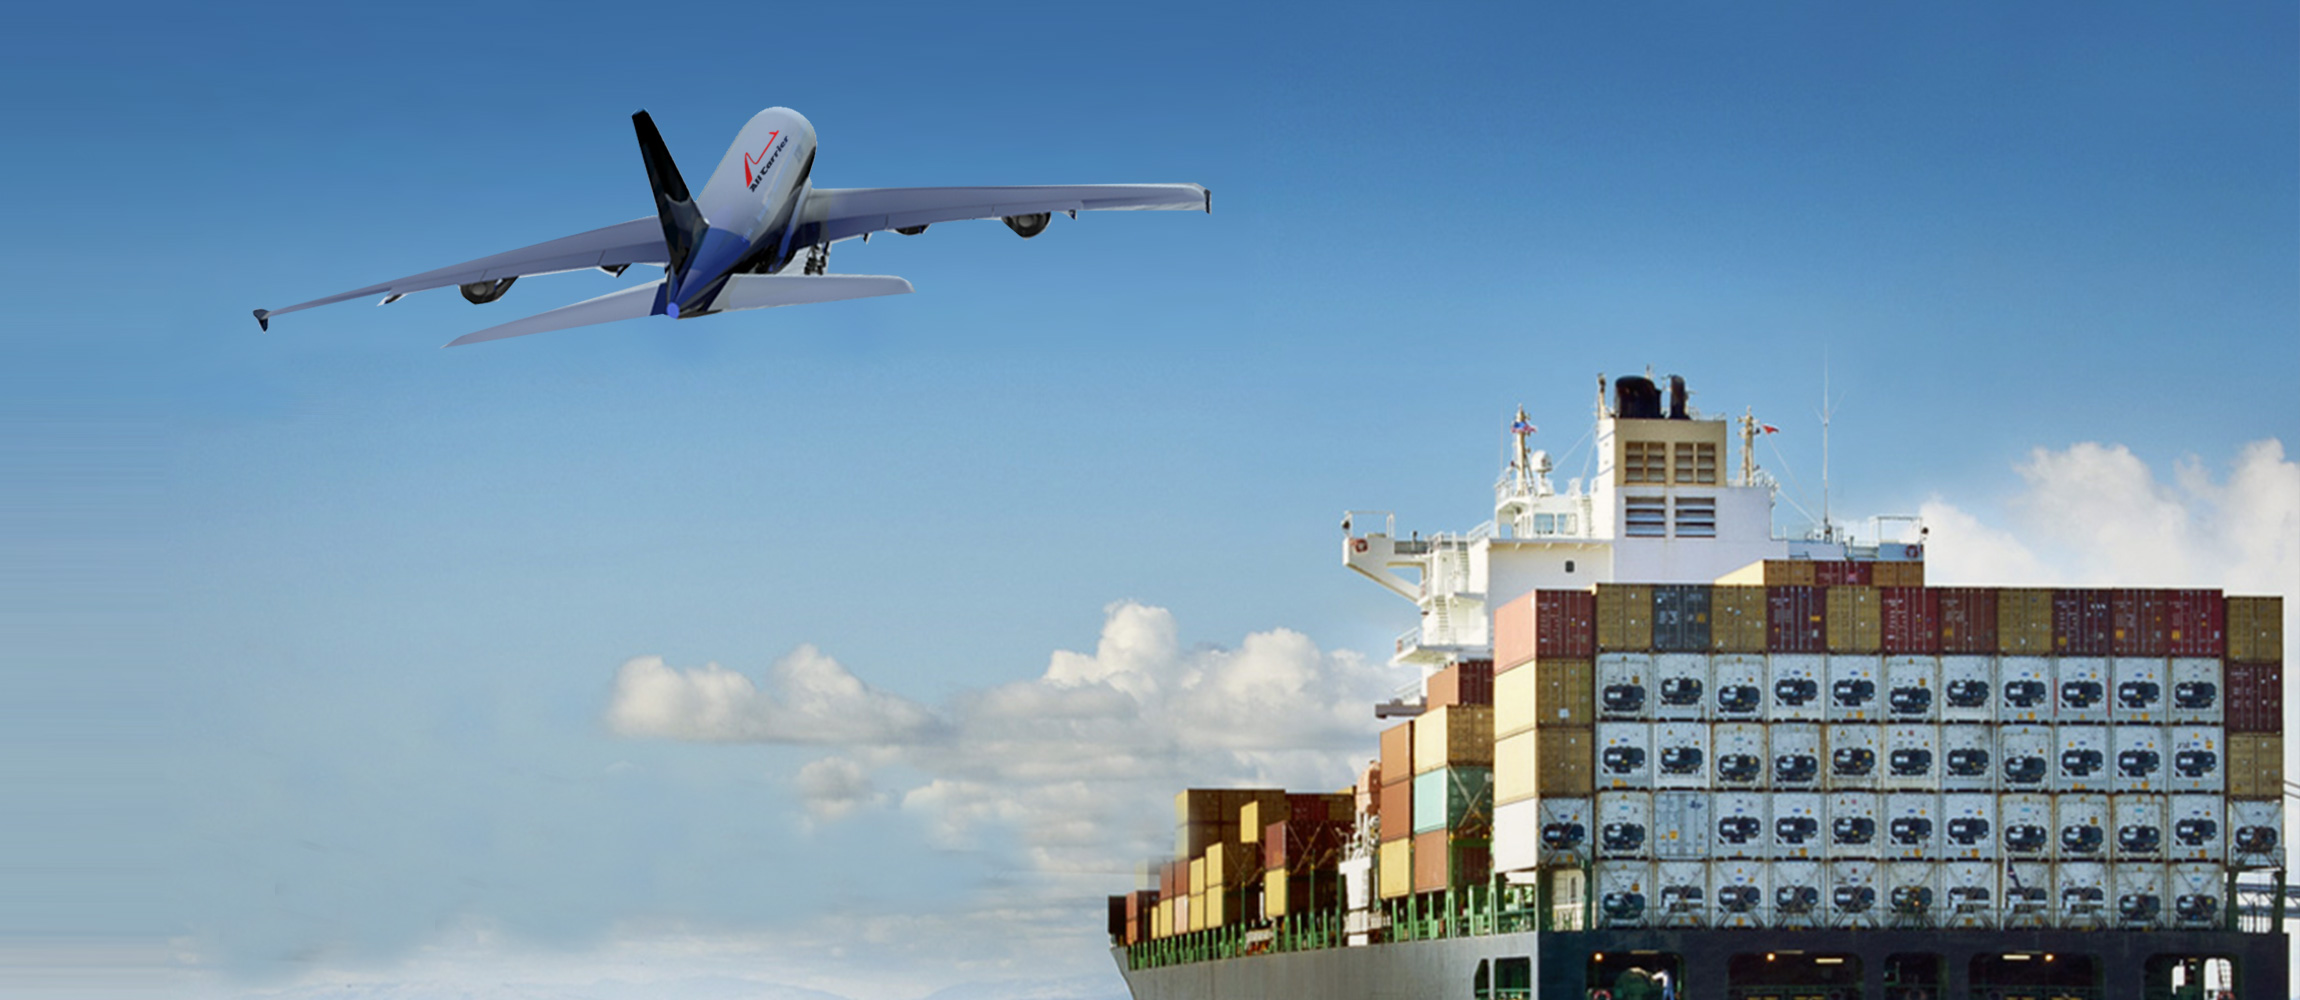 Airplane of SkyWorld Air Cargo Airline the solution for all your global shipping needs